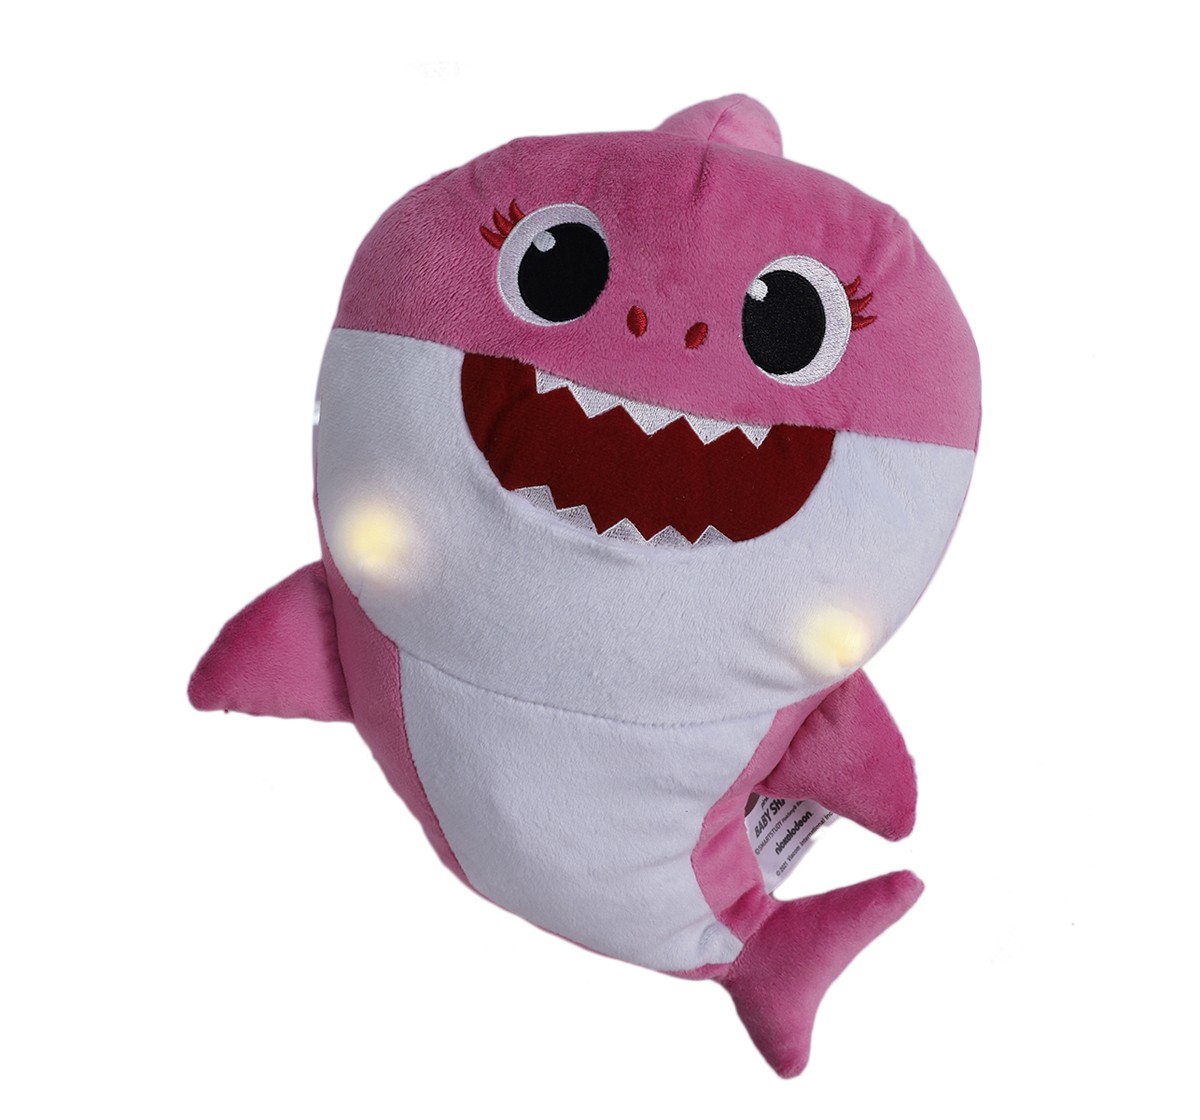 Baby Shark Plush Sing and Light up Plush Toy 12 Inch Mommy Shark for 1 Year and Above